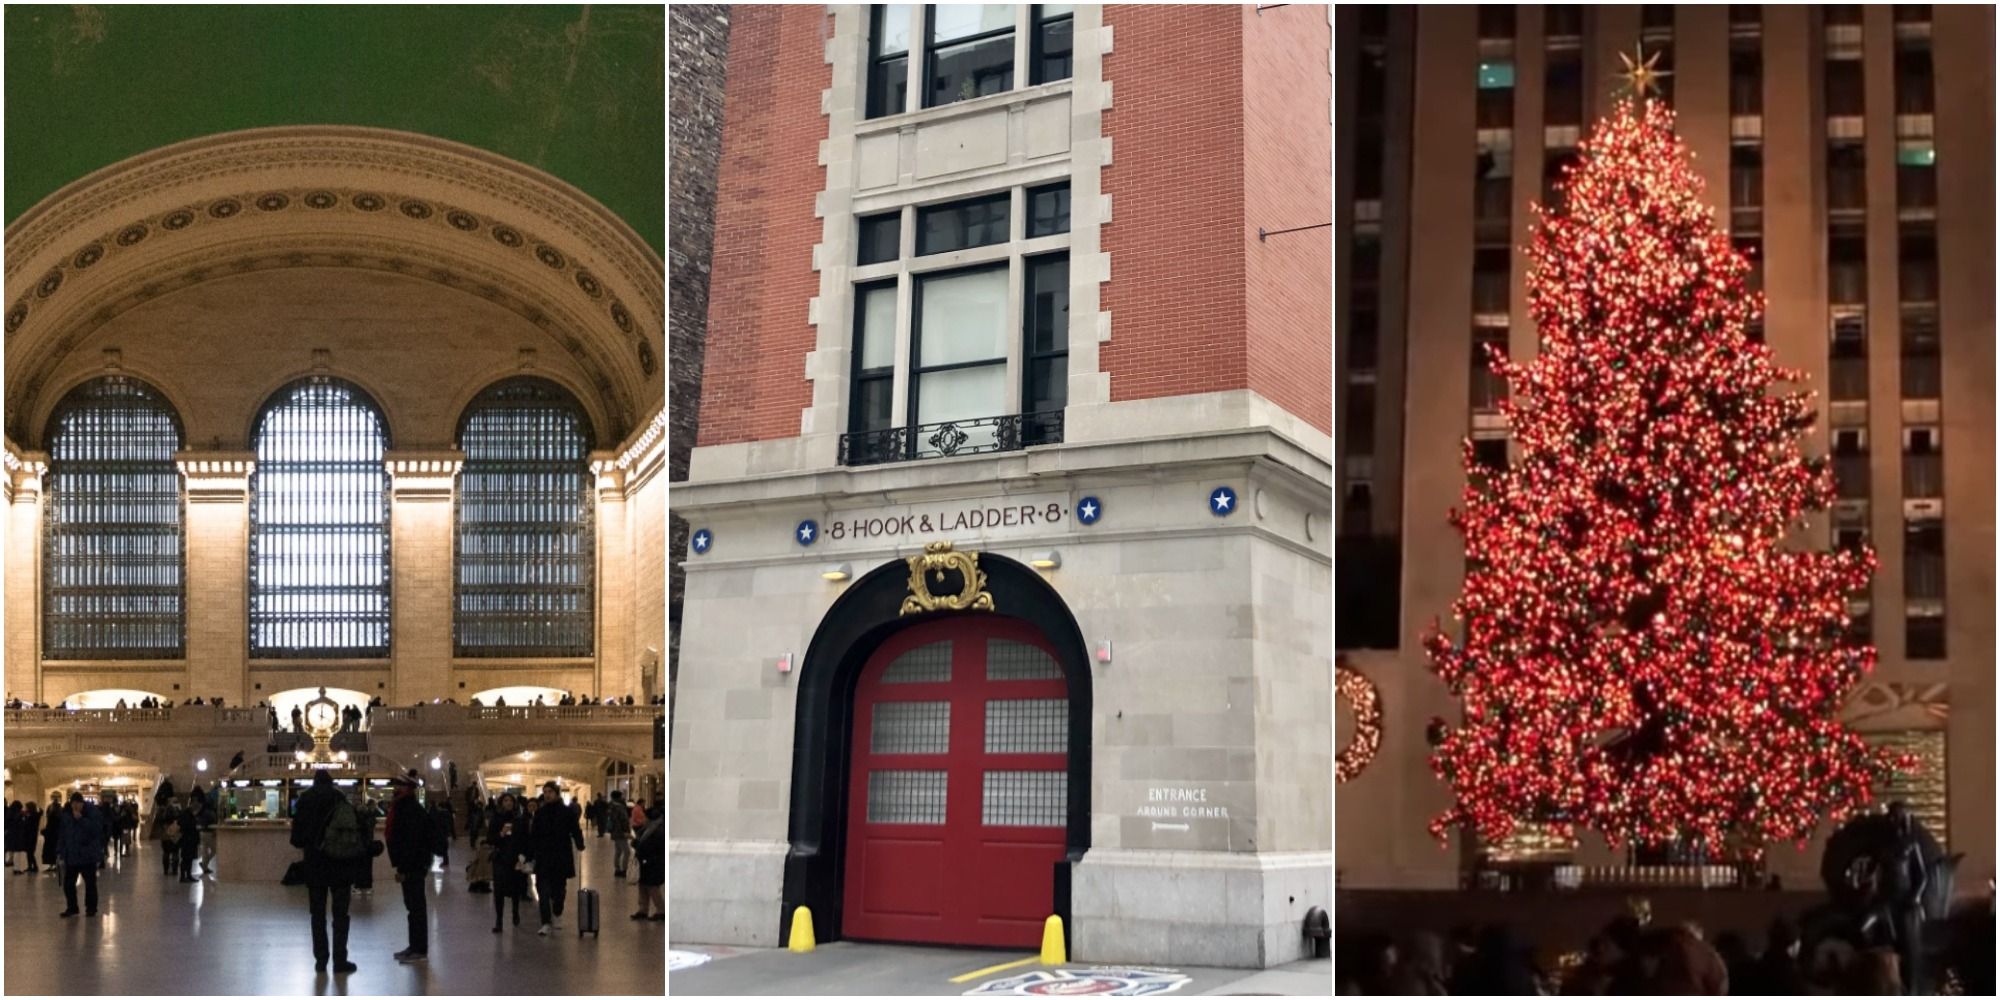 The 10 most iconic NYC scenes from “Ghostbusters”